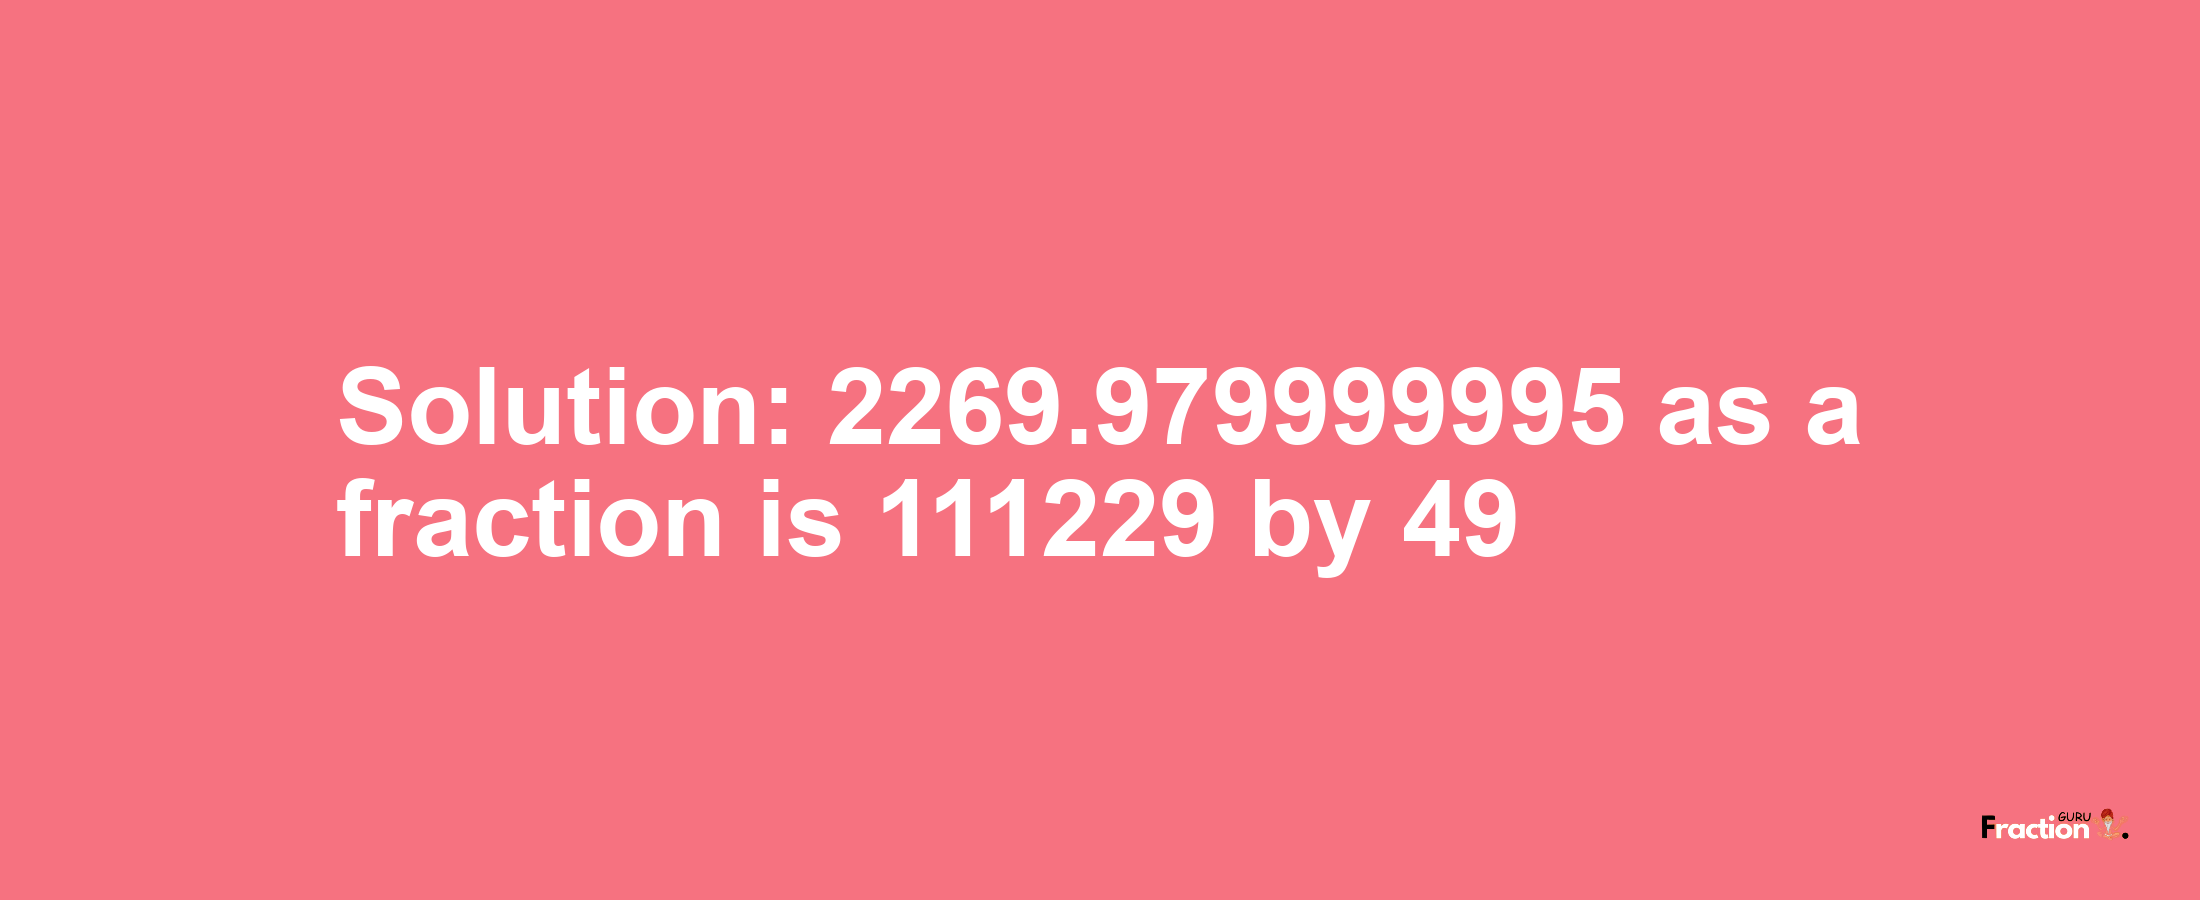 Solution:2269.979999995 as a fraction is 111229/49